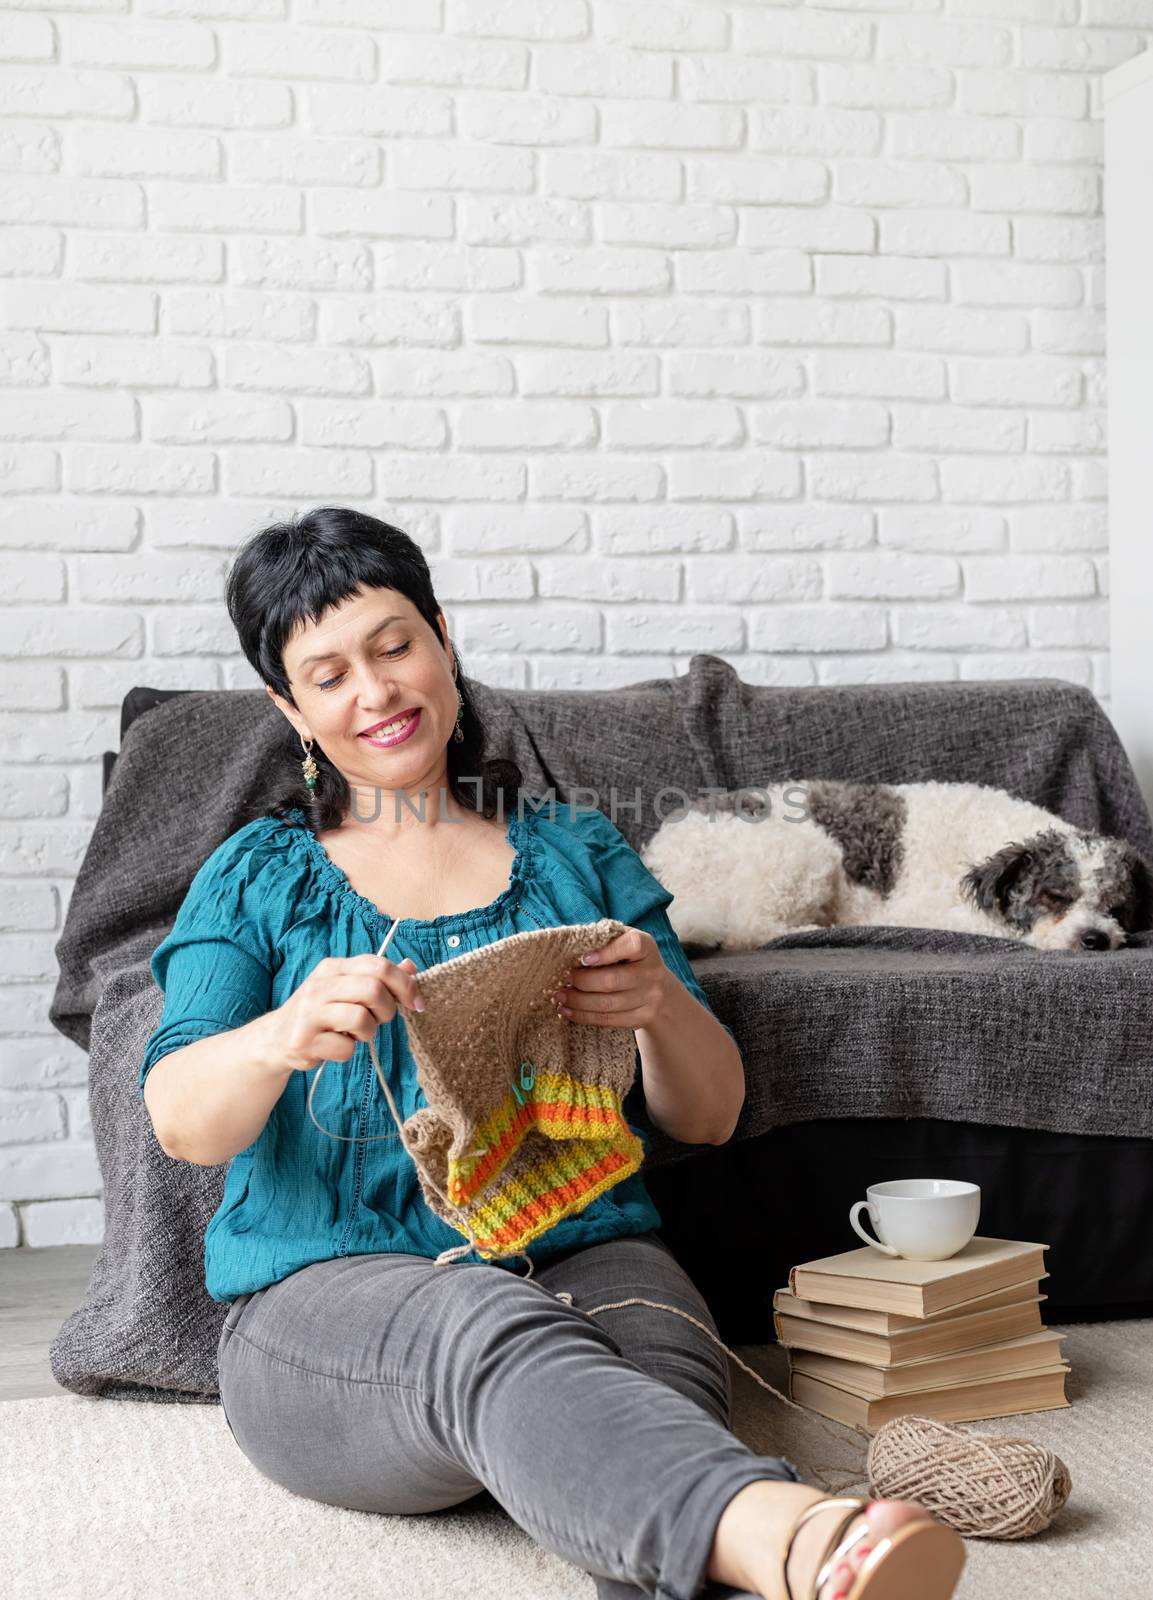 Charming middle aged woman enjoying being at home and knitting sitting on the sofa by Desperada